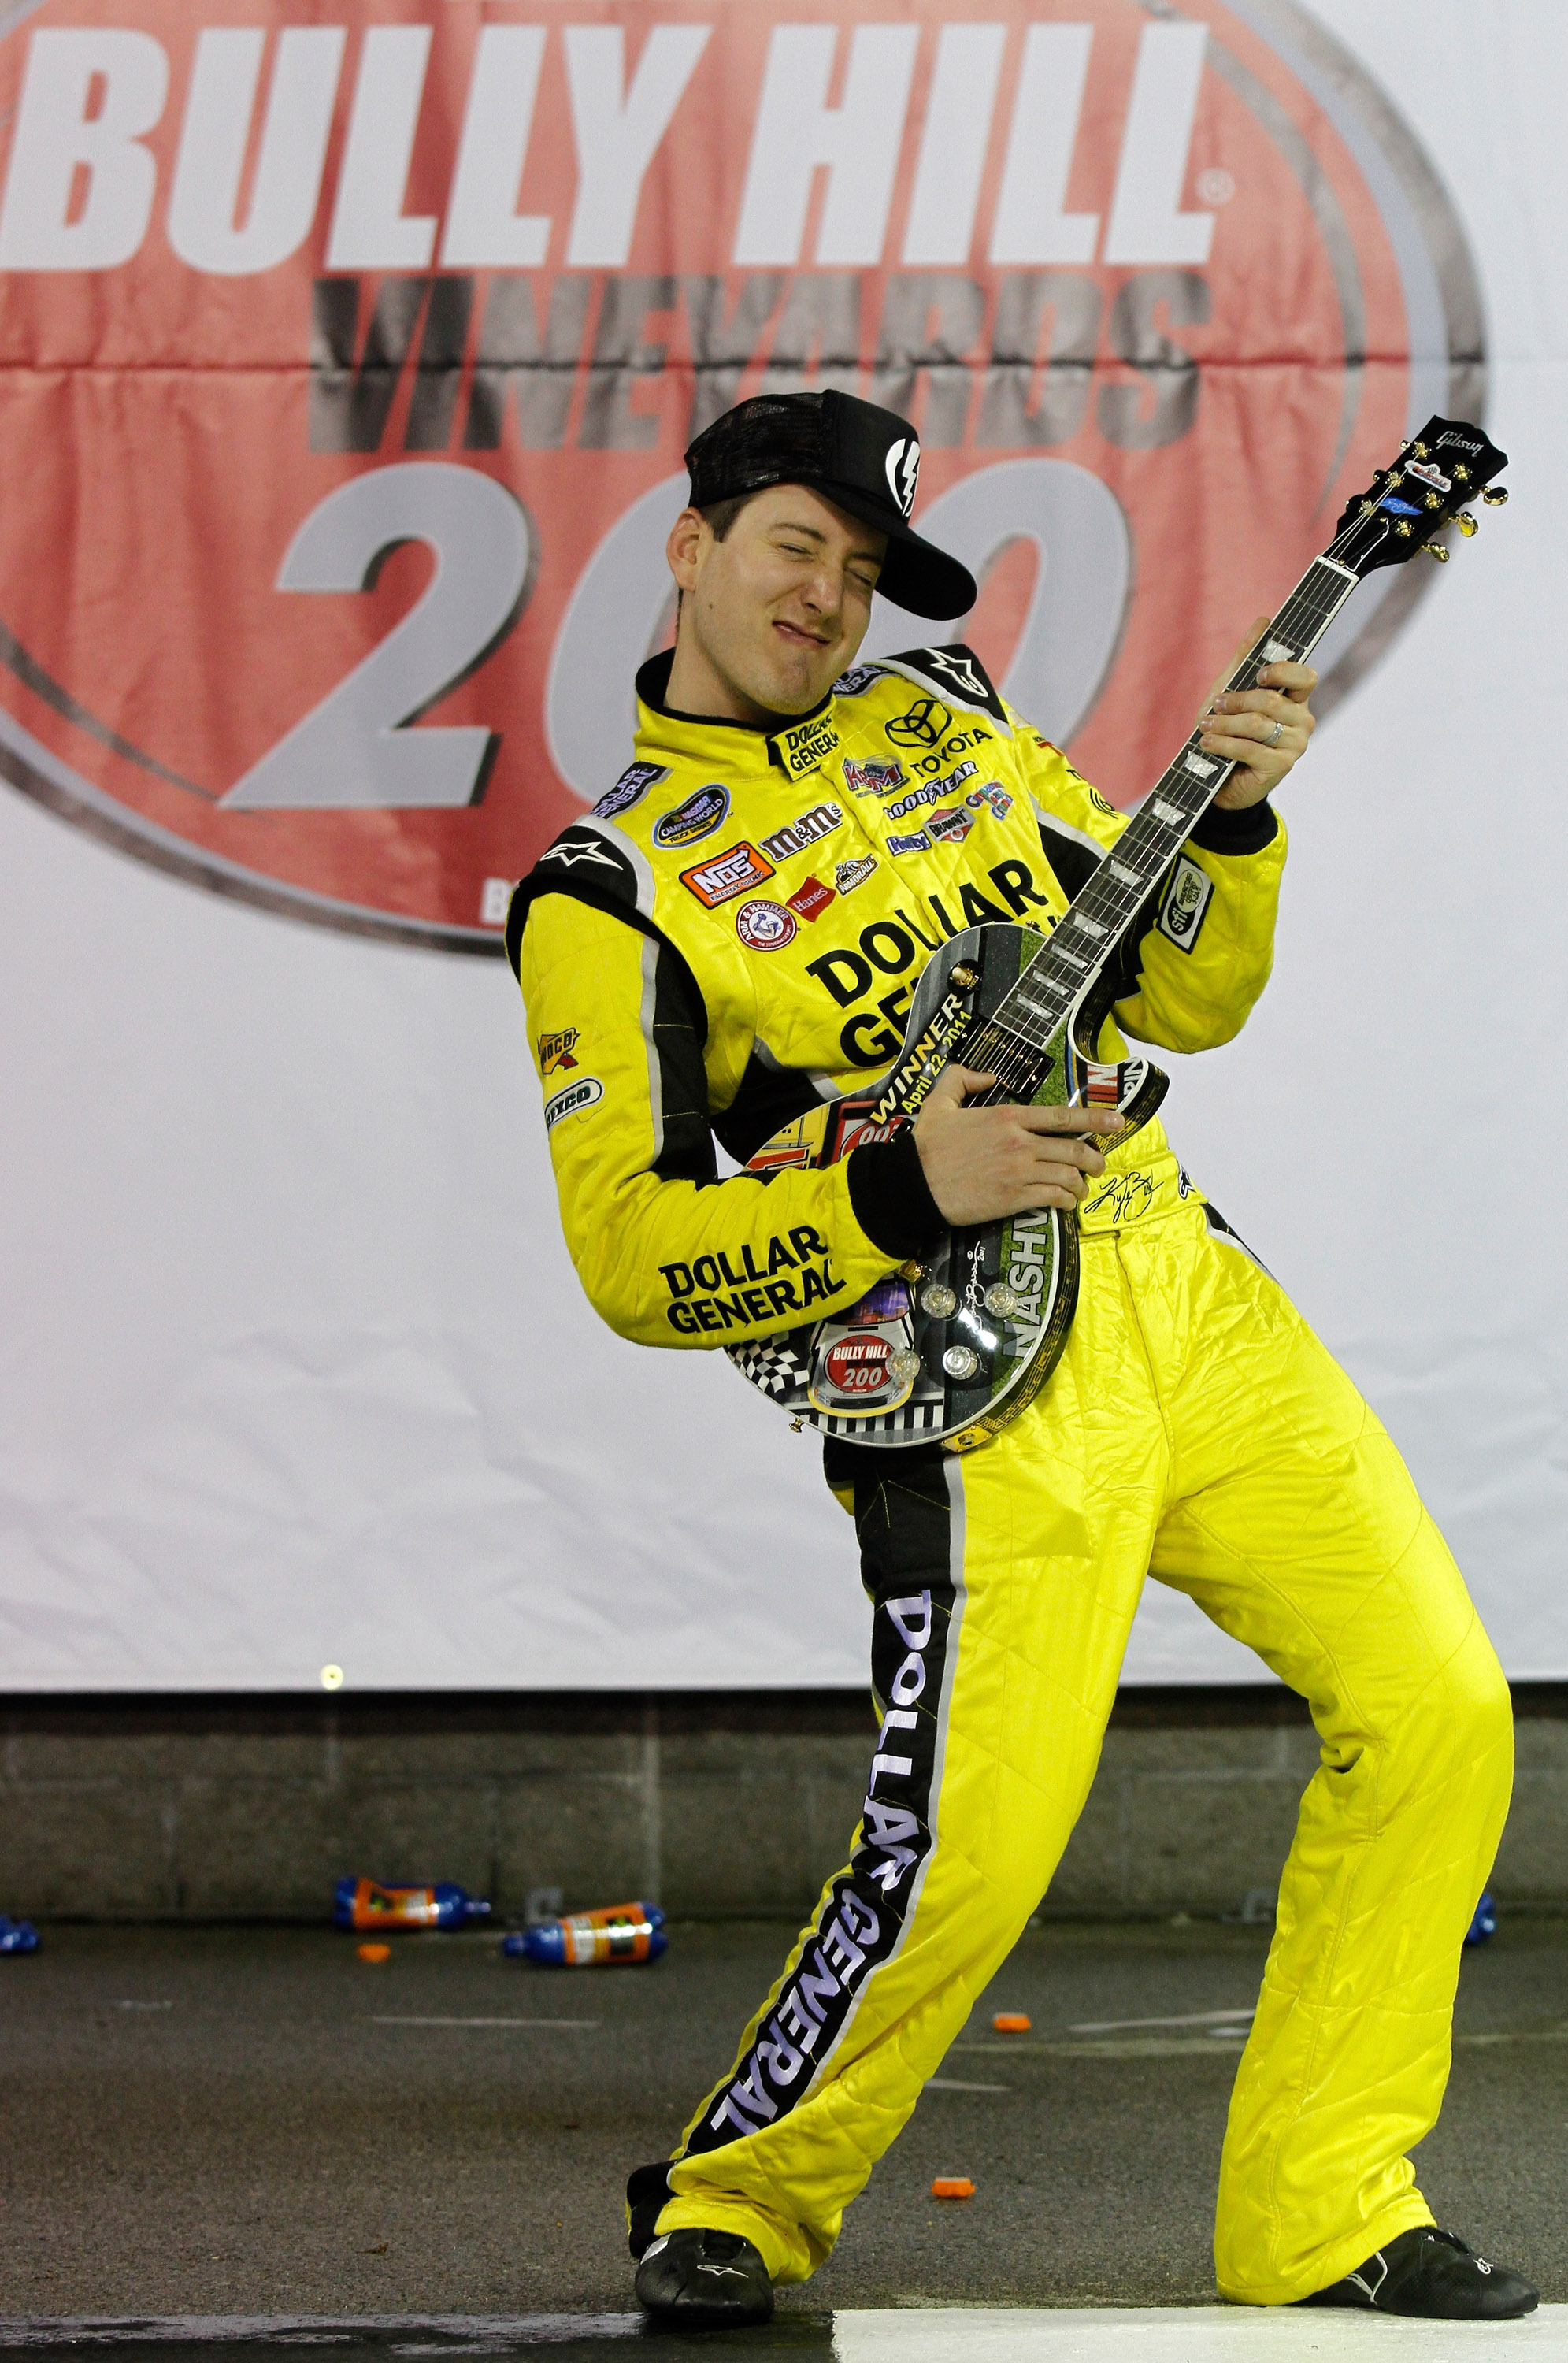 LEBANON, TN - APRIL 22:  Kyle Busch, driver of the #18 Dollar General Toyota celebrates in victory lane after winning the NASCAR Camping World Truck Series Bully Hill Vineyards 200 at Nashville Superspeedway on April 22, 2011 in Lebanon, Tennessee.  (Phot